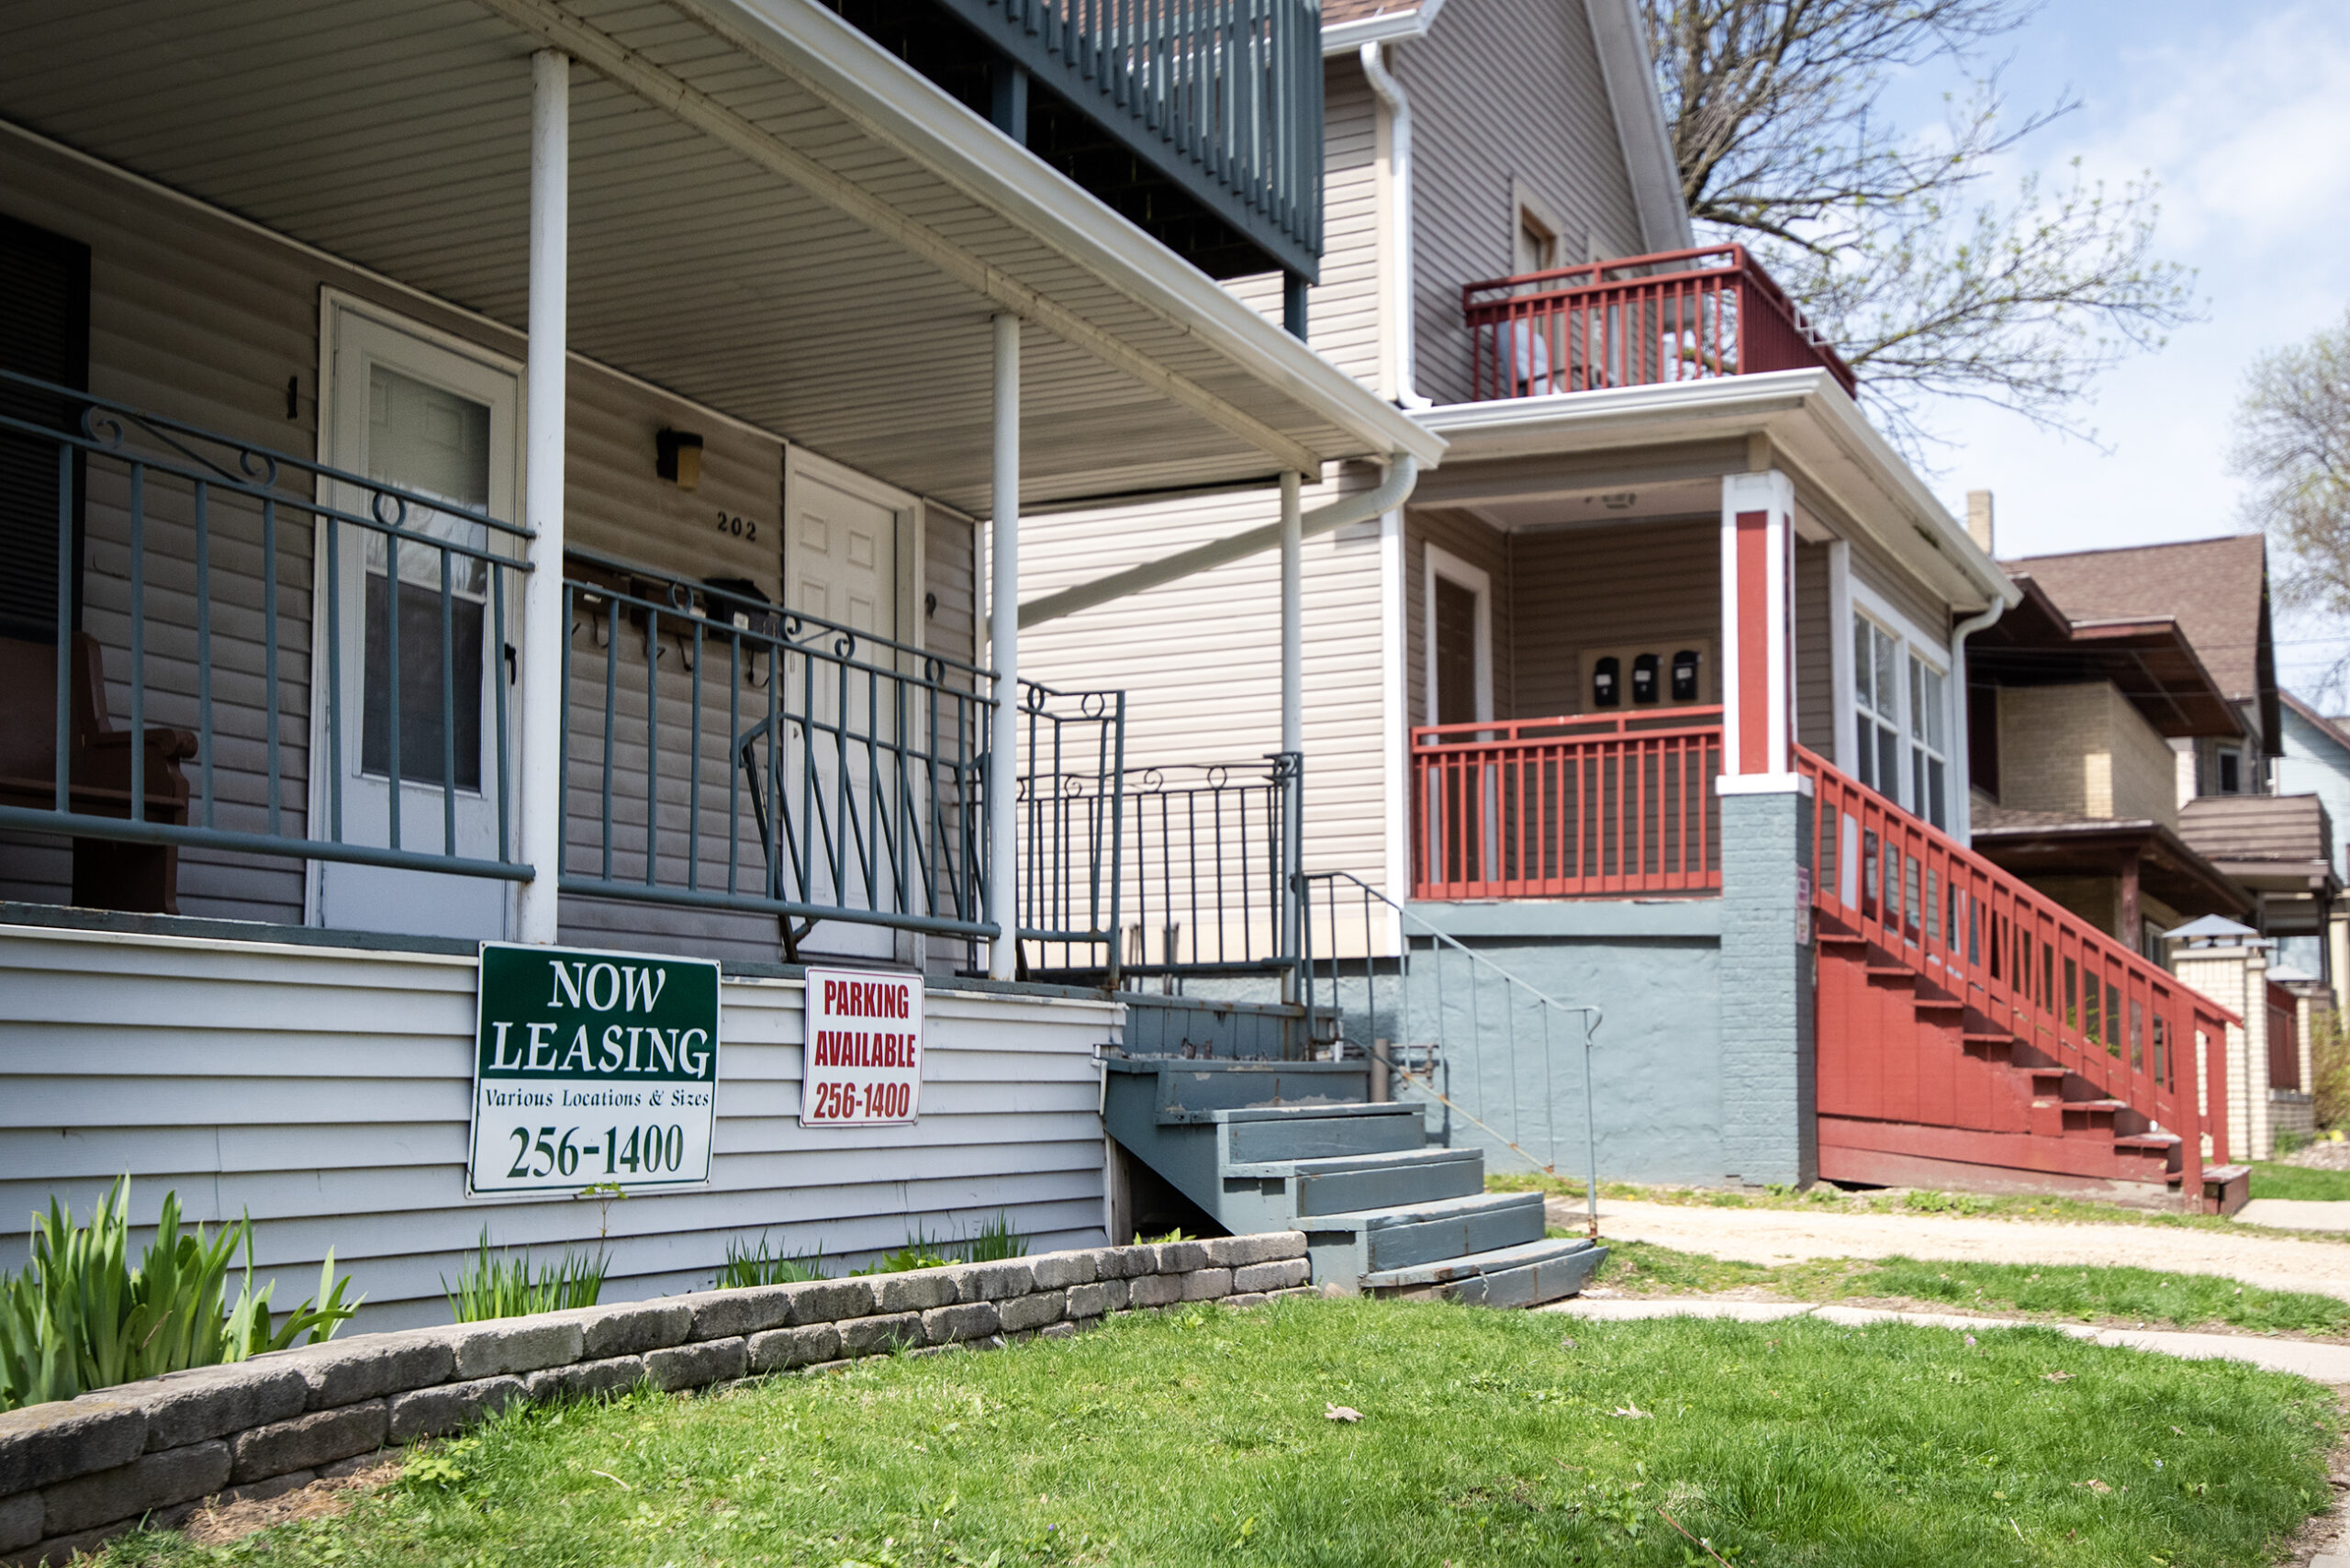 Two signs are posted on a porch advertising spaces for rent.